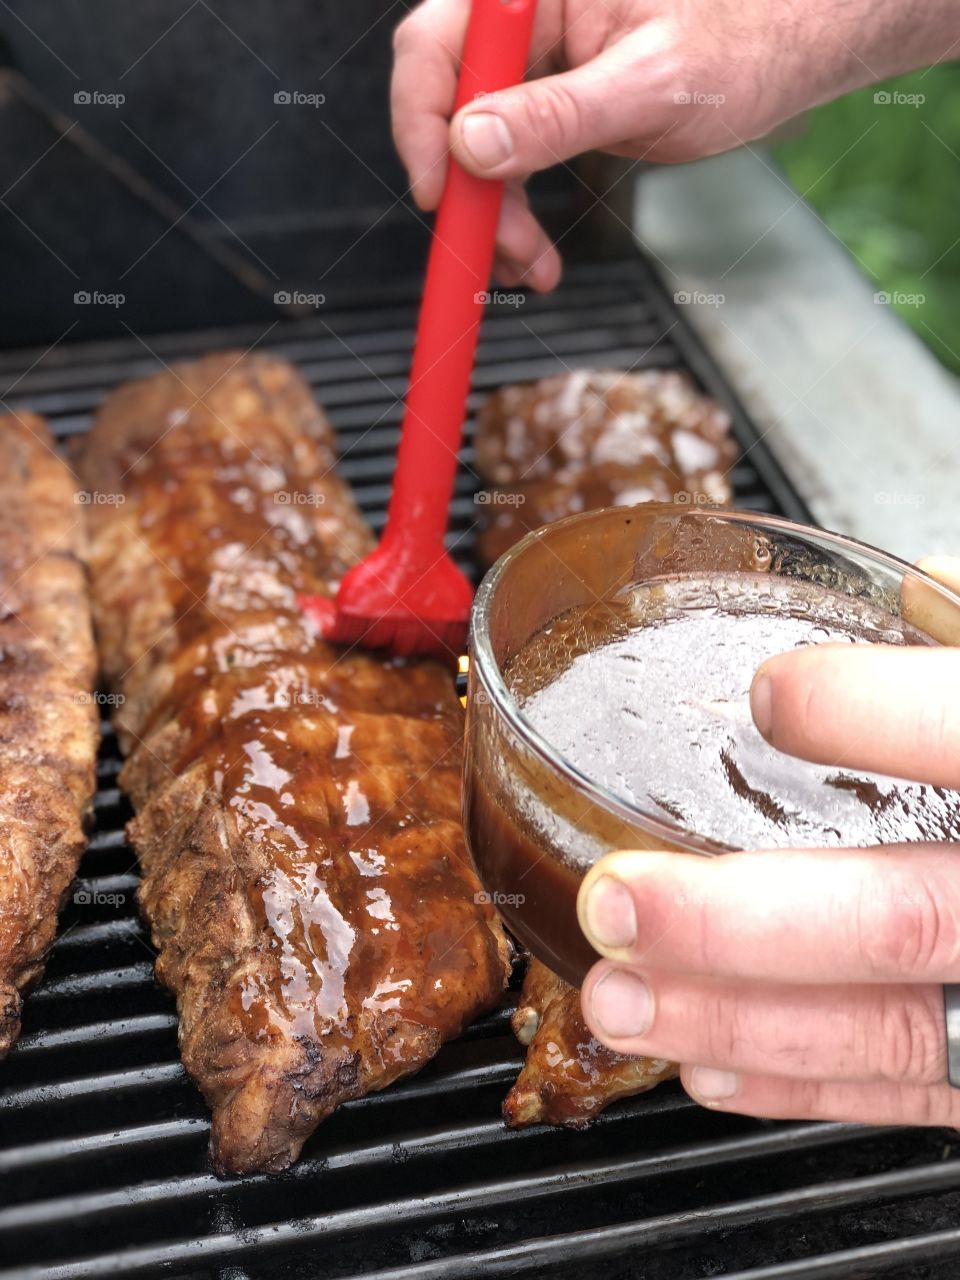 BQ ribs on the grill. These ribs are being basted in homemade BQ sauce. These delicious and tender ribs will melt in your mouth.